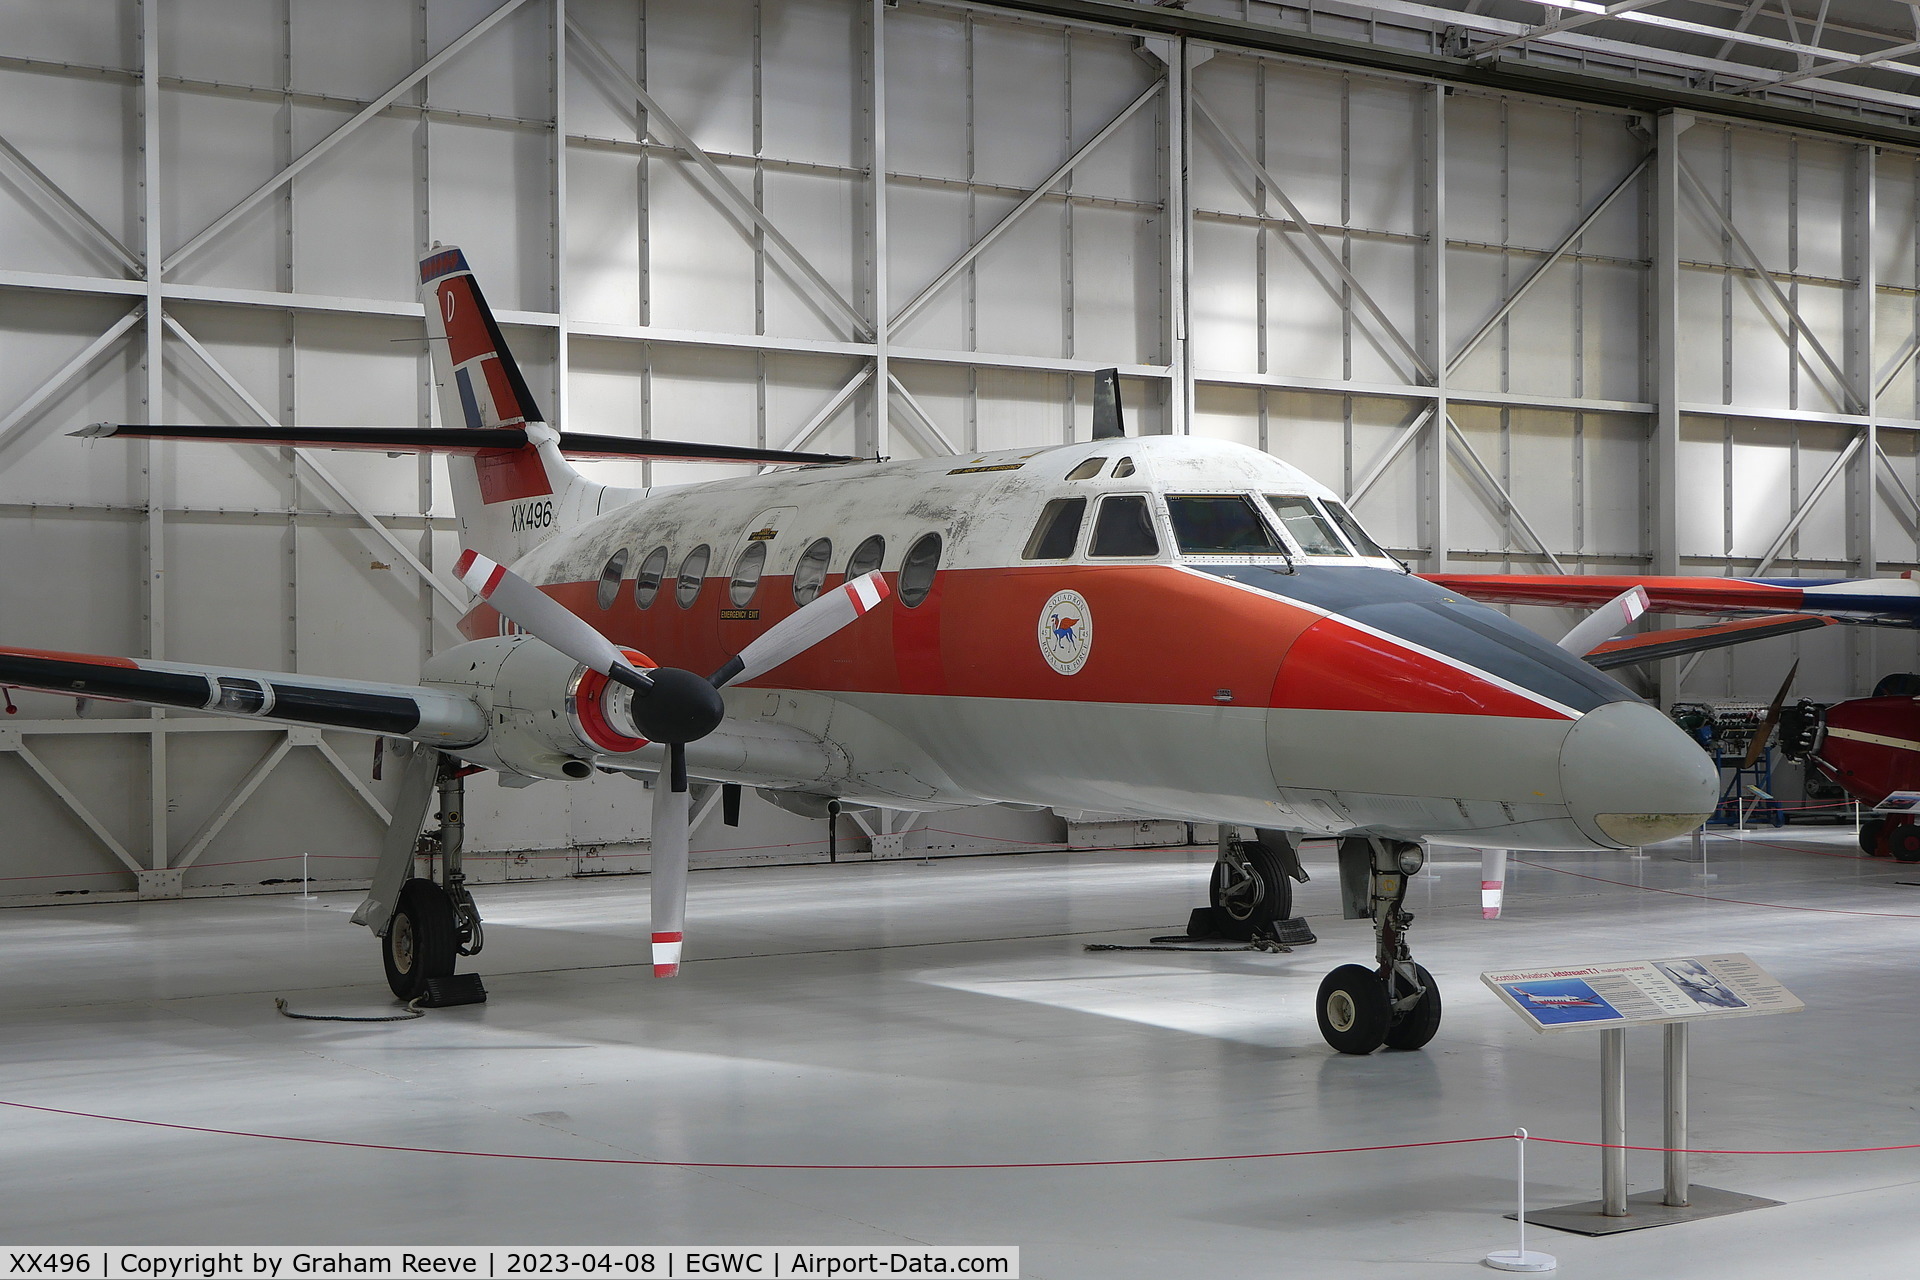 XX496, 1975 Scottish Aviation HP-137 Jetstream T.1 C/N 276, On display at the RAF Museum, Cosford.